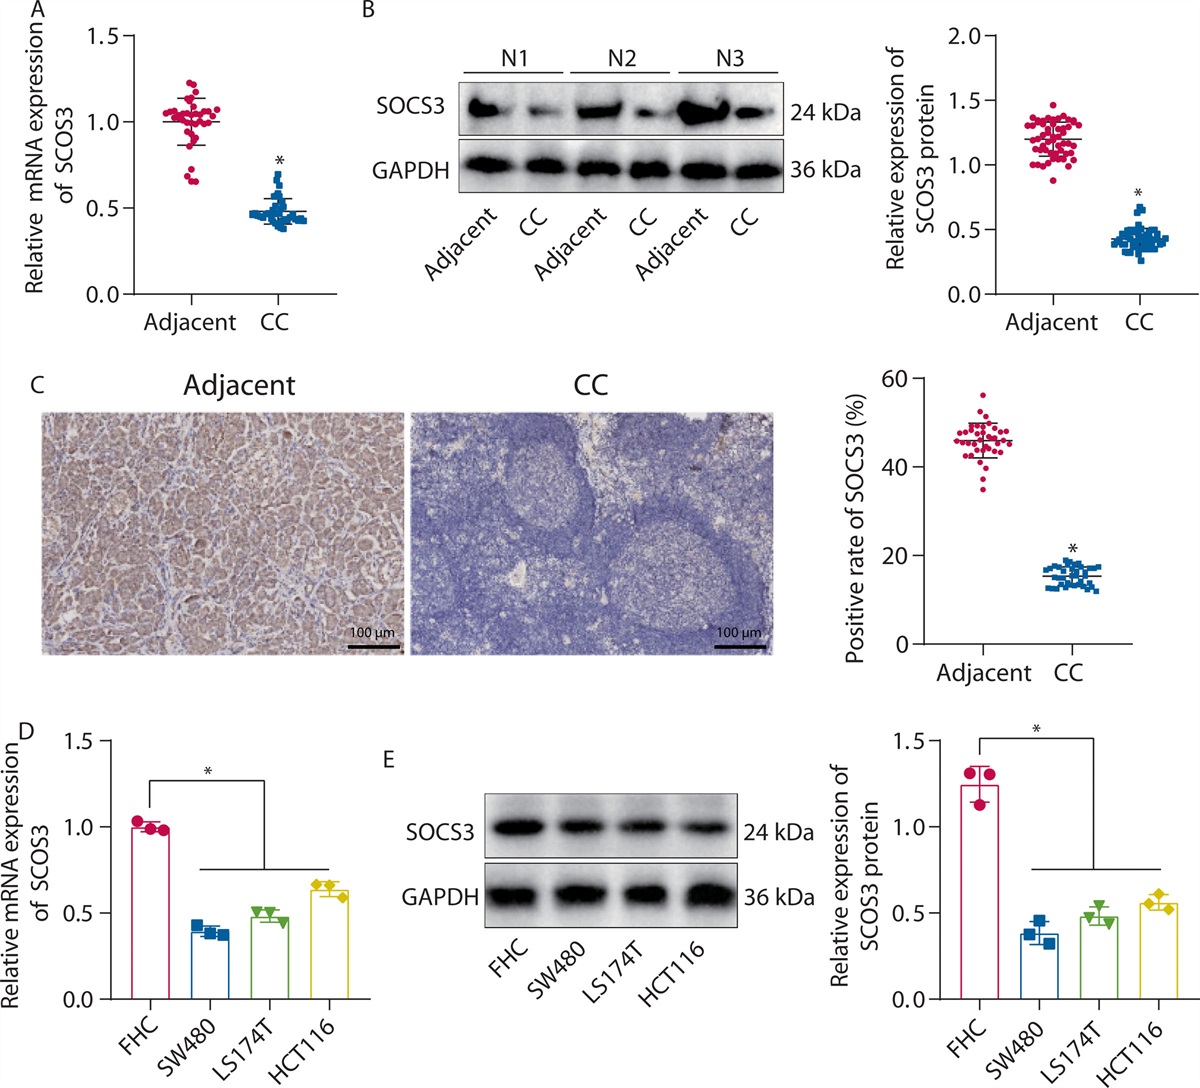 M2 Macrophage-Derived Extracellular Vesicles Containing MicroRNA-501-3p Promote Colon Cancer Progression Through the SETD7/DNMT1/SOCS3 Axis